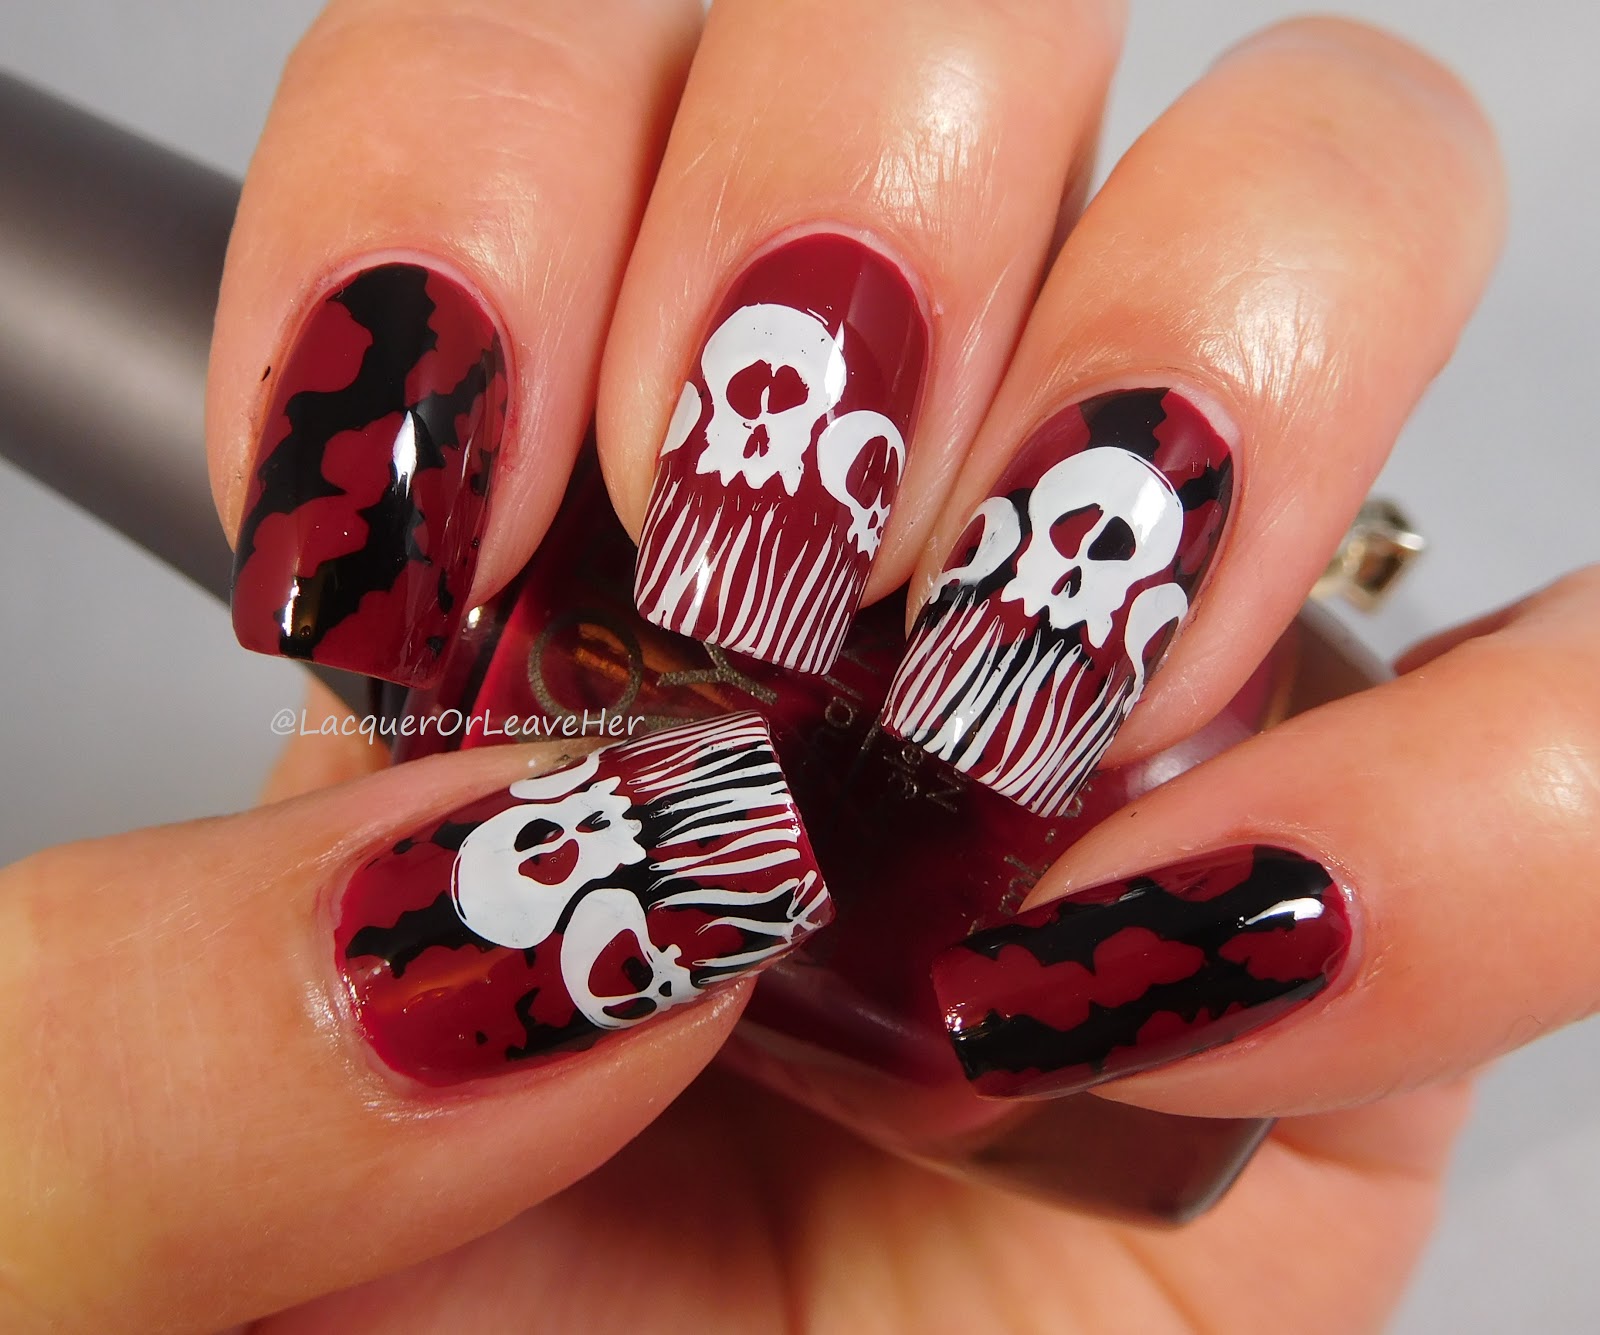 Lacquer or Leave Her!: NOTD: The Gates of Hell...